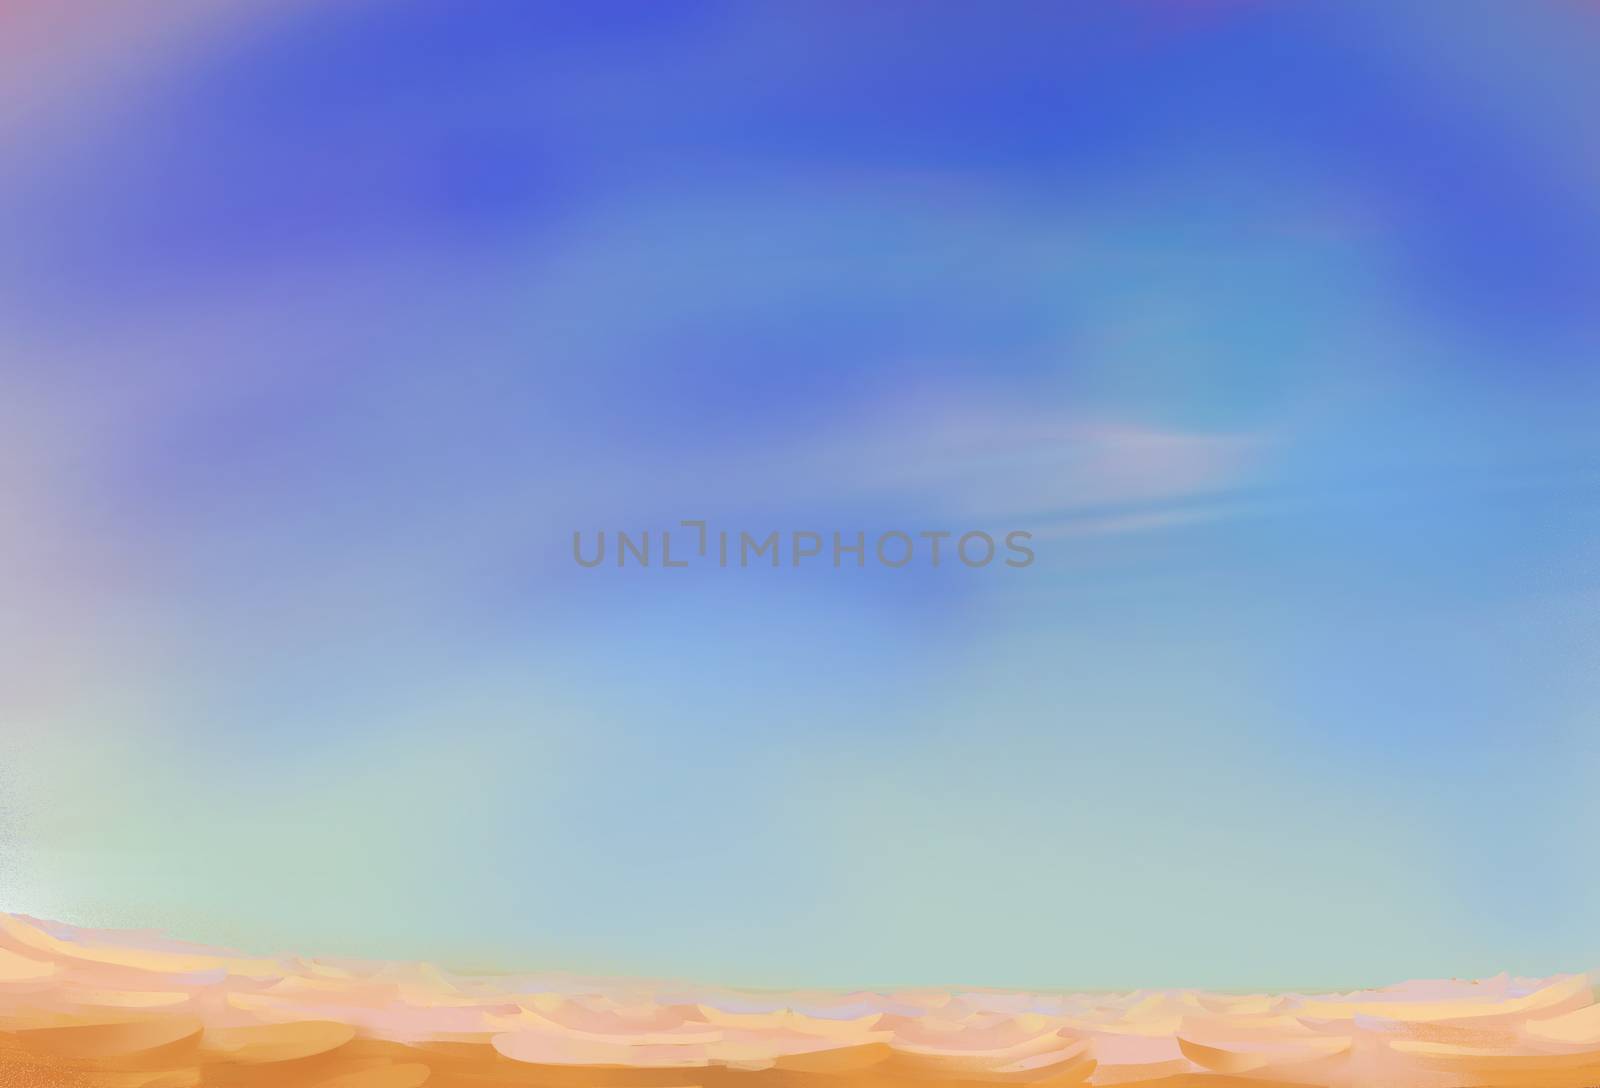 Illustration: The Desert View with different combination: White Cloud, Blue Sky, Shifting Sand, Weird Stone Pillars. Fantastic Realistic Cartoon Style. Wallpaper Background Scene Design.